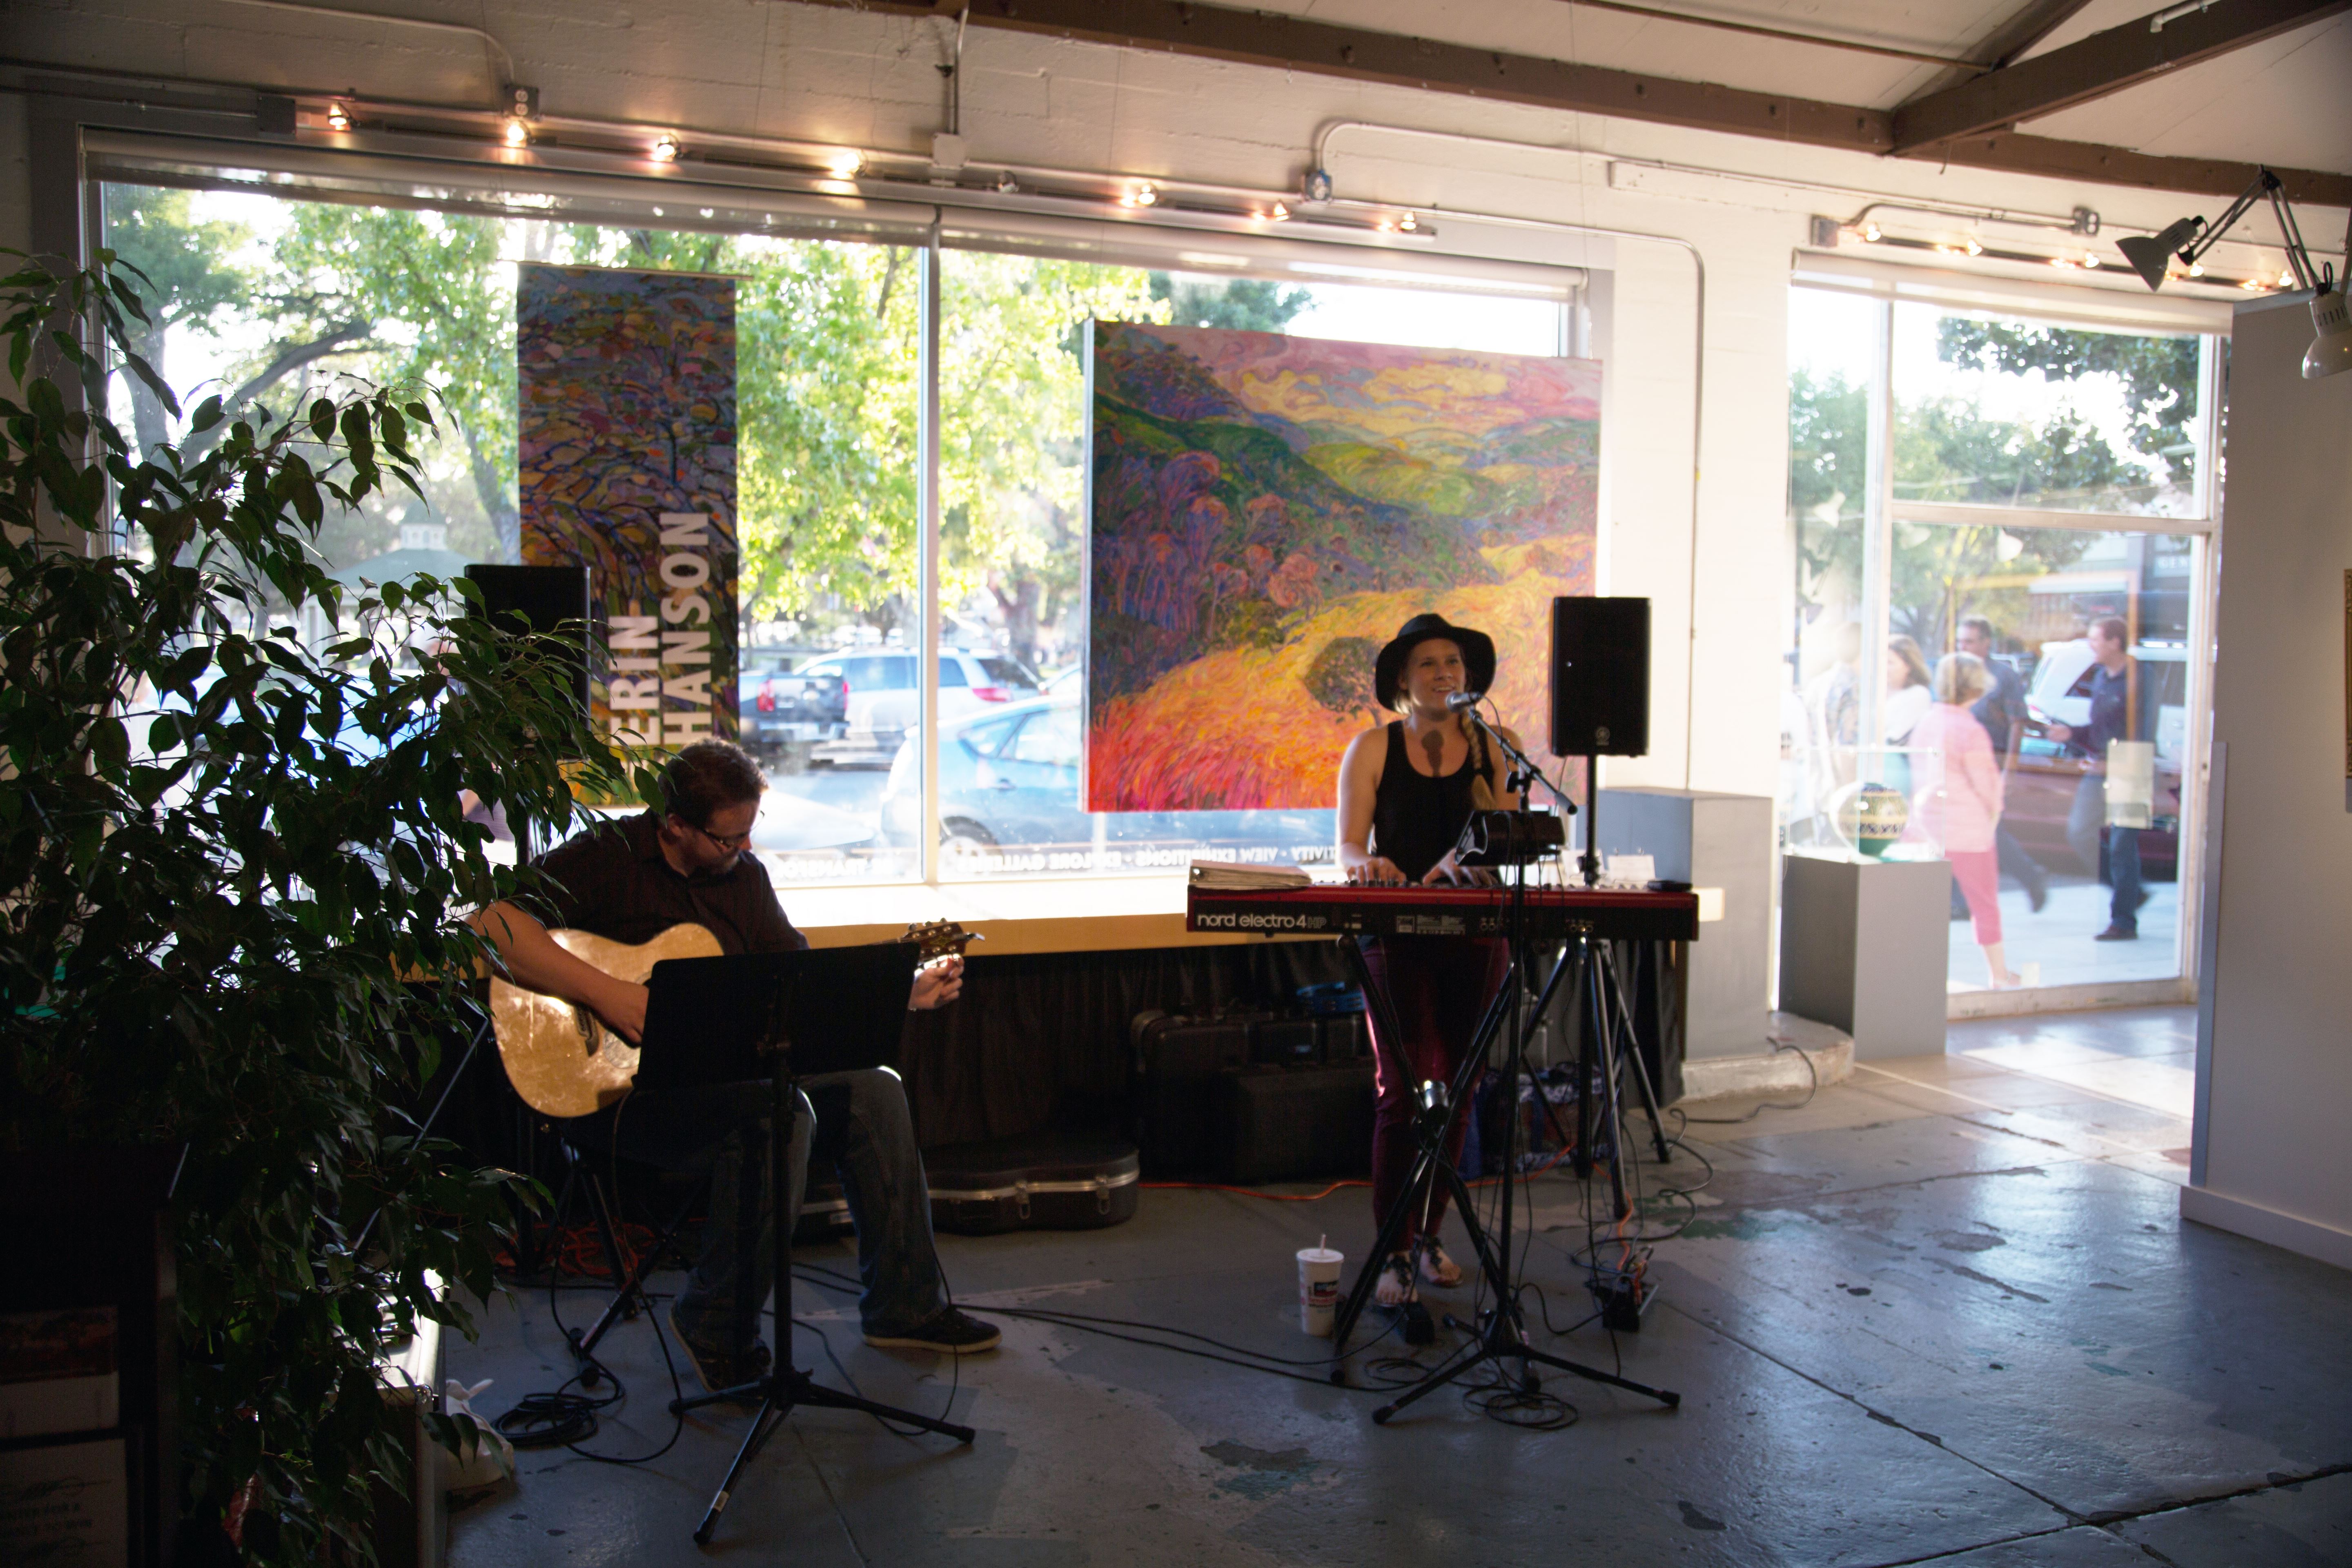 Live music at the exhibition